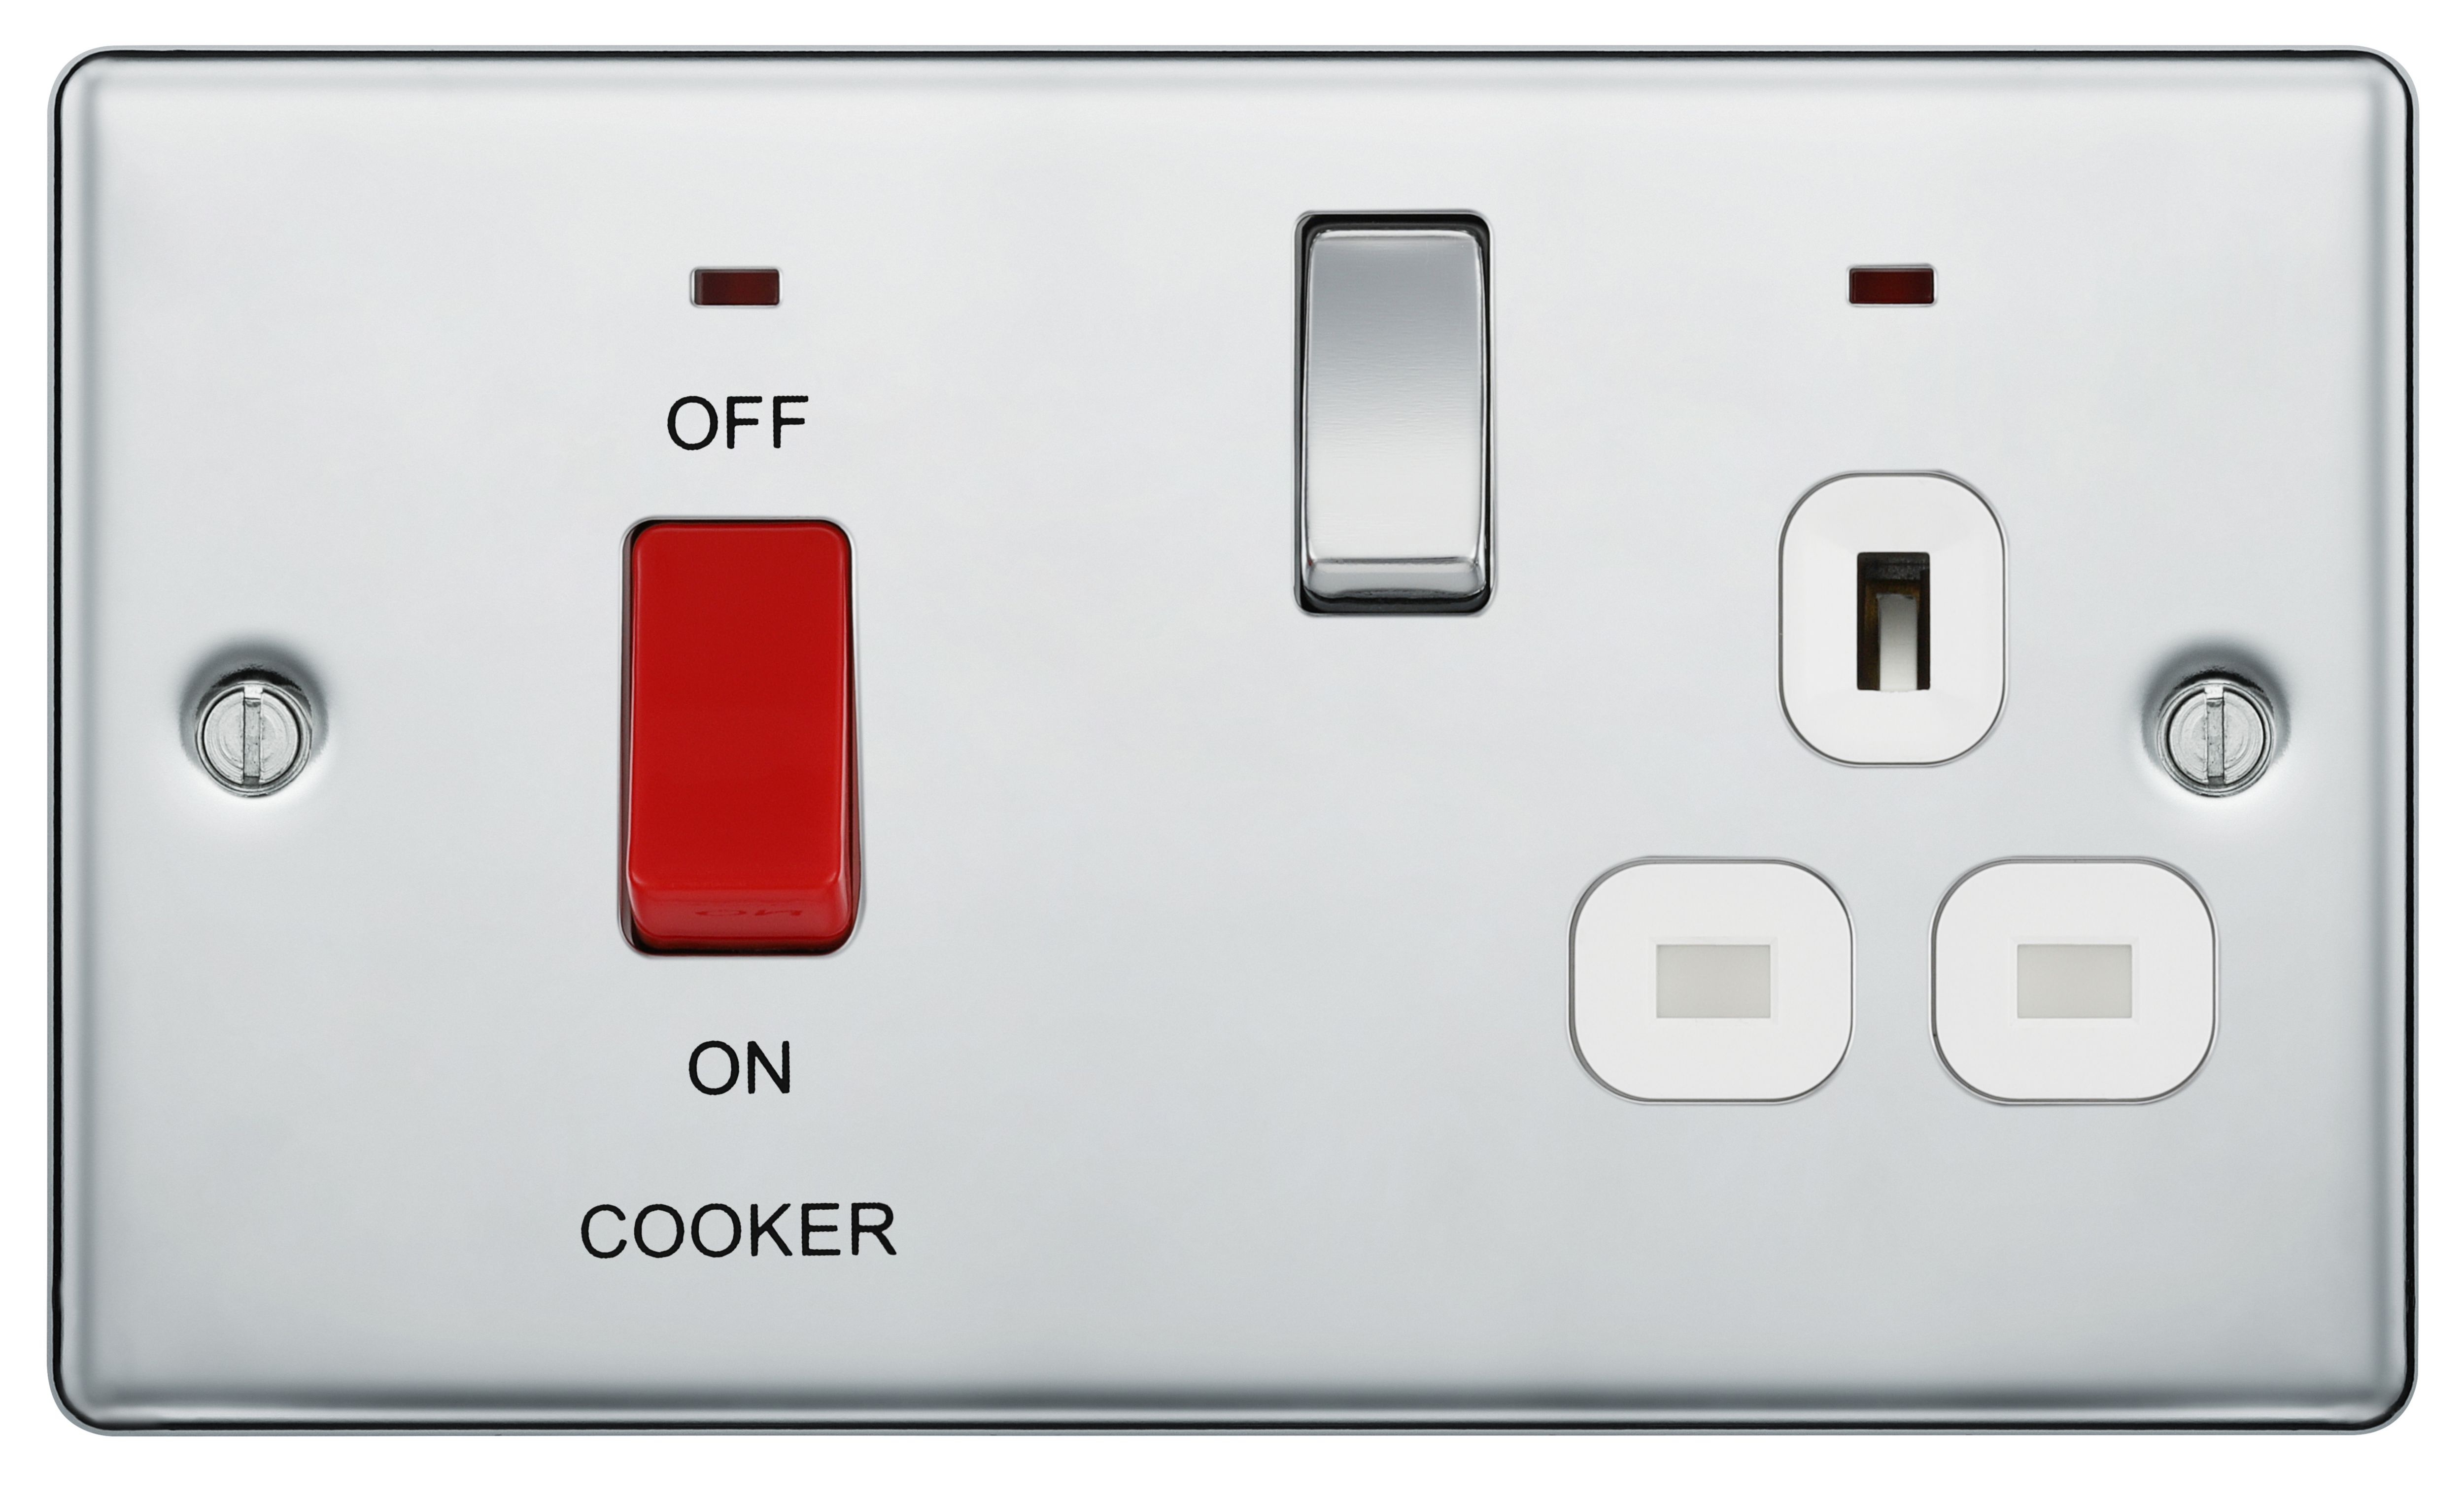 BG 45 Amp Screwed Raised Plate Cooker Control Unit with Switched 13 Amp Power Socket Includes Power Indicators - Polished Chrome